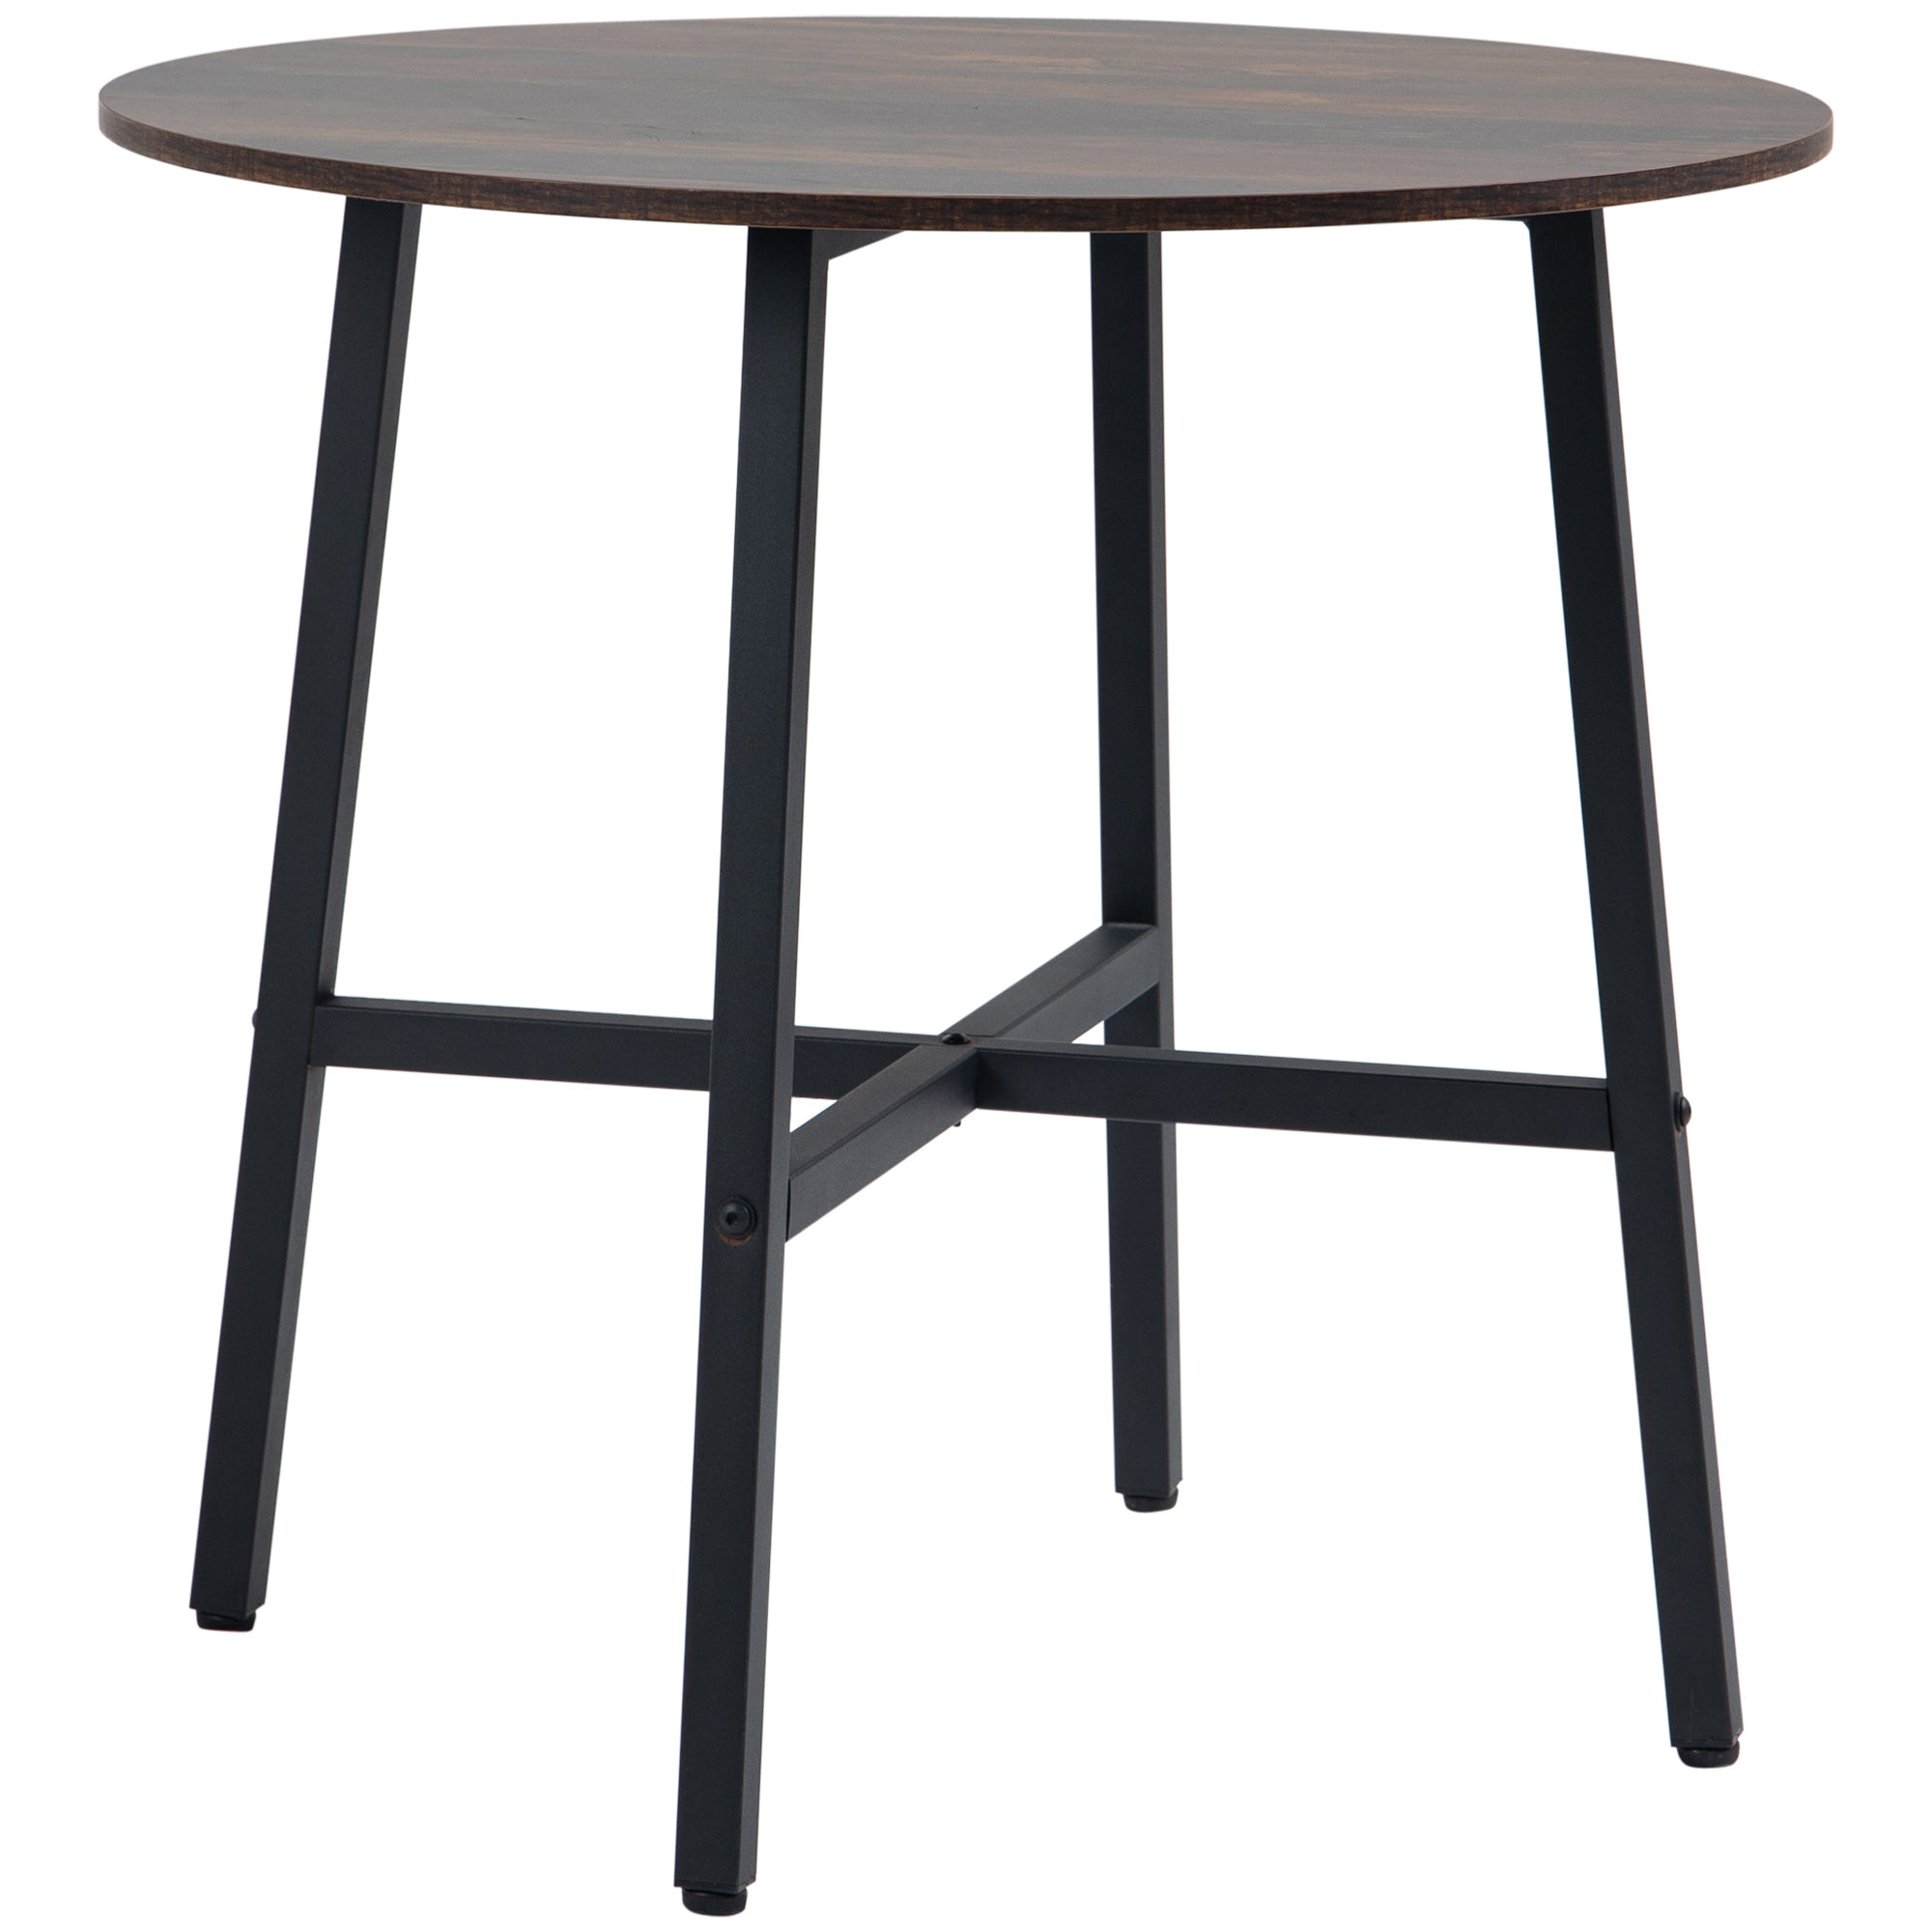 HOMCOM 80cm Round Kitchen Table - Dining Table for Small Spaces - Steel Leg  | TJ Hughes